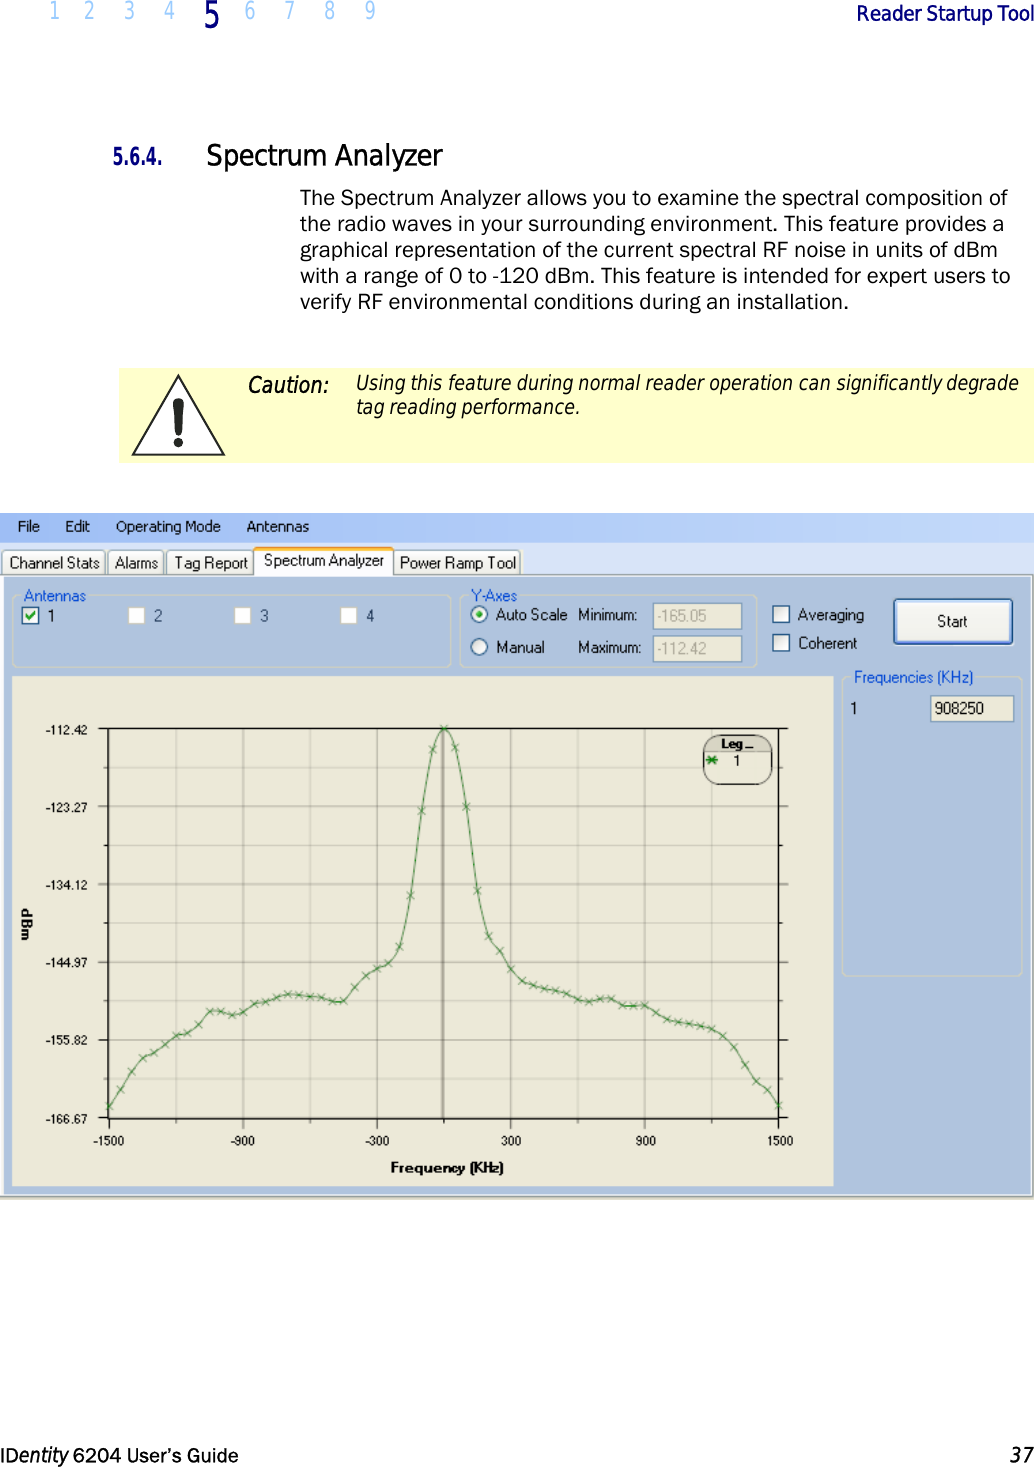  1 2 3 4 5  6 7 8 9        Reader Startup Tool   IDentity 6204 User’s Guide  37  5.6.4. Spectrum Analyzer The Spectrum Analyzer allows you to examine the spectral composition of the radio waves in your surrounding environment. This feature provides a graphical representation of the current spectral RF noise in units of dBm with a range of 0 to -120 dBm. This feature is intended for expert users to verify RF environmental conditions during an installation.    Caution:  Using this feature during normal reader operation can significantly degrade tag reading performance.       